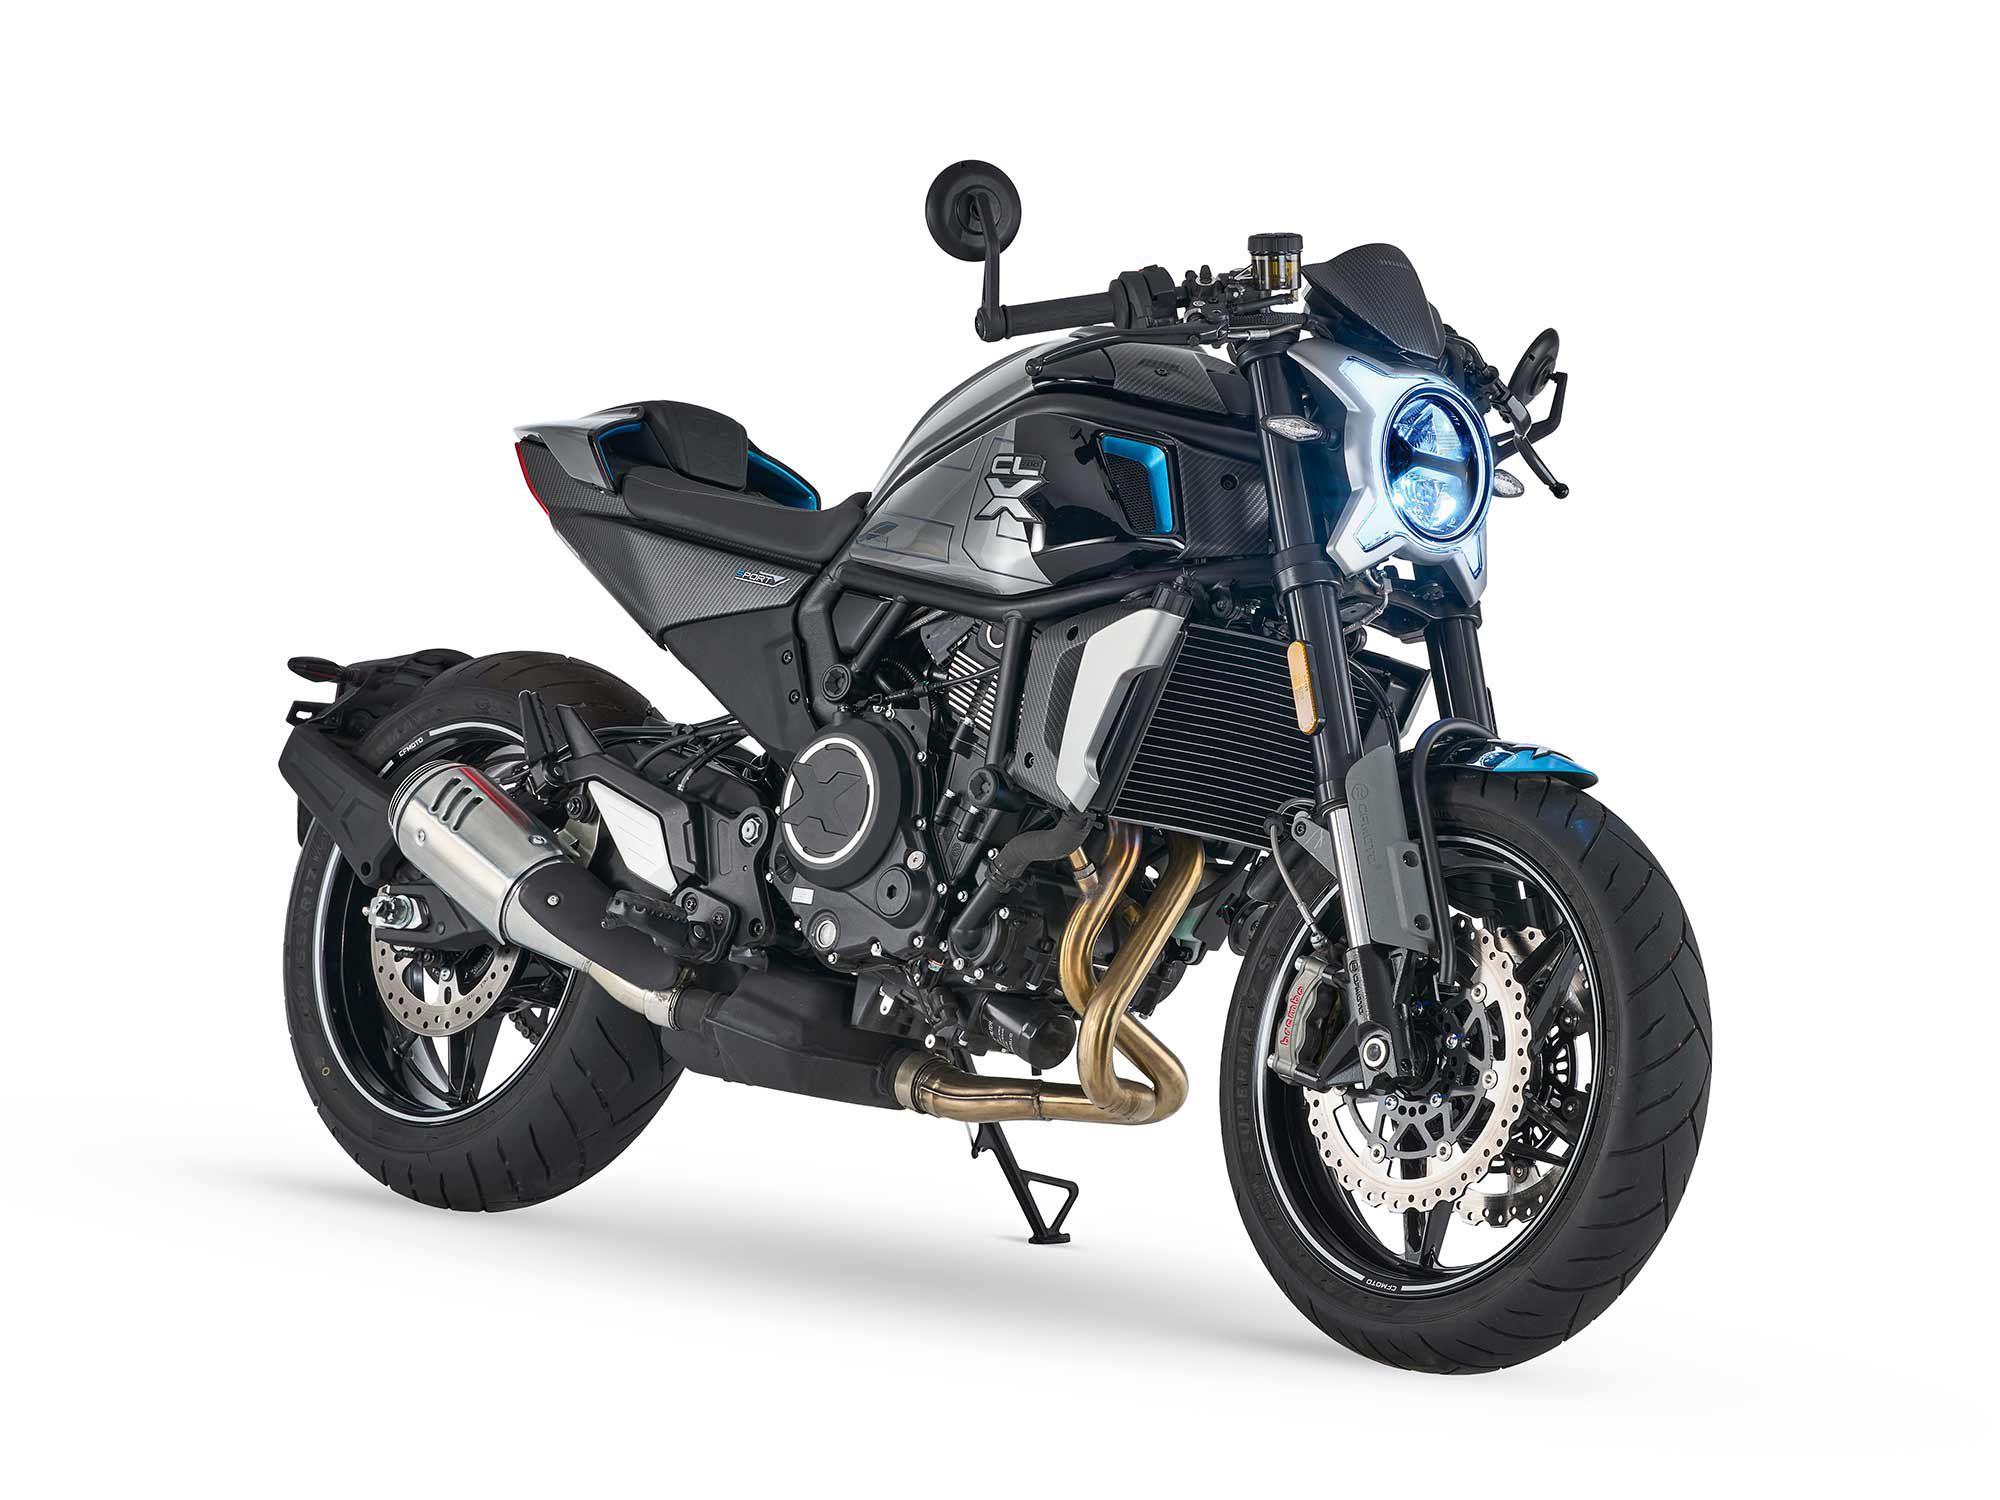 The 700CL-X Sport is the more performance-oriented model in the 700CL-X lineup. CFMOTO describes the bike as “a street-smart motorcycle with a stripped-down, muscular look and attitude to match.”